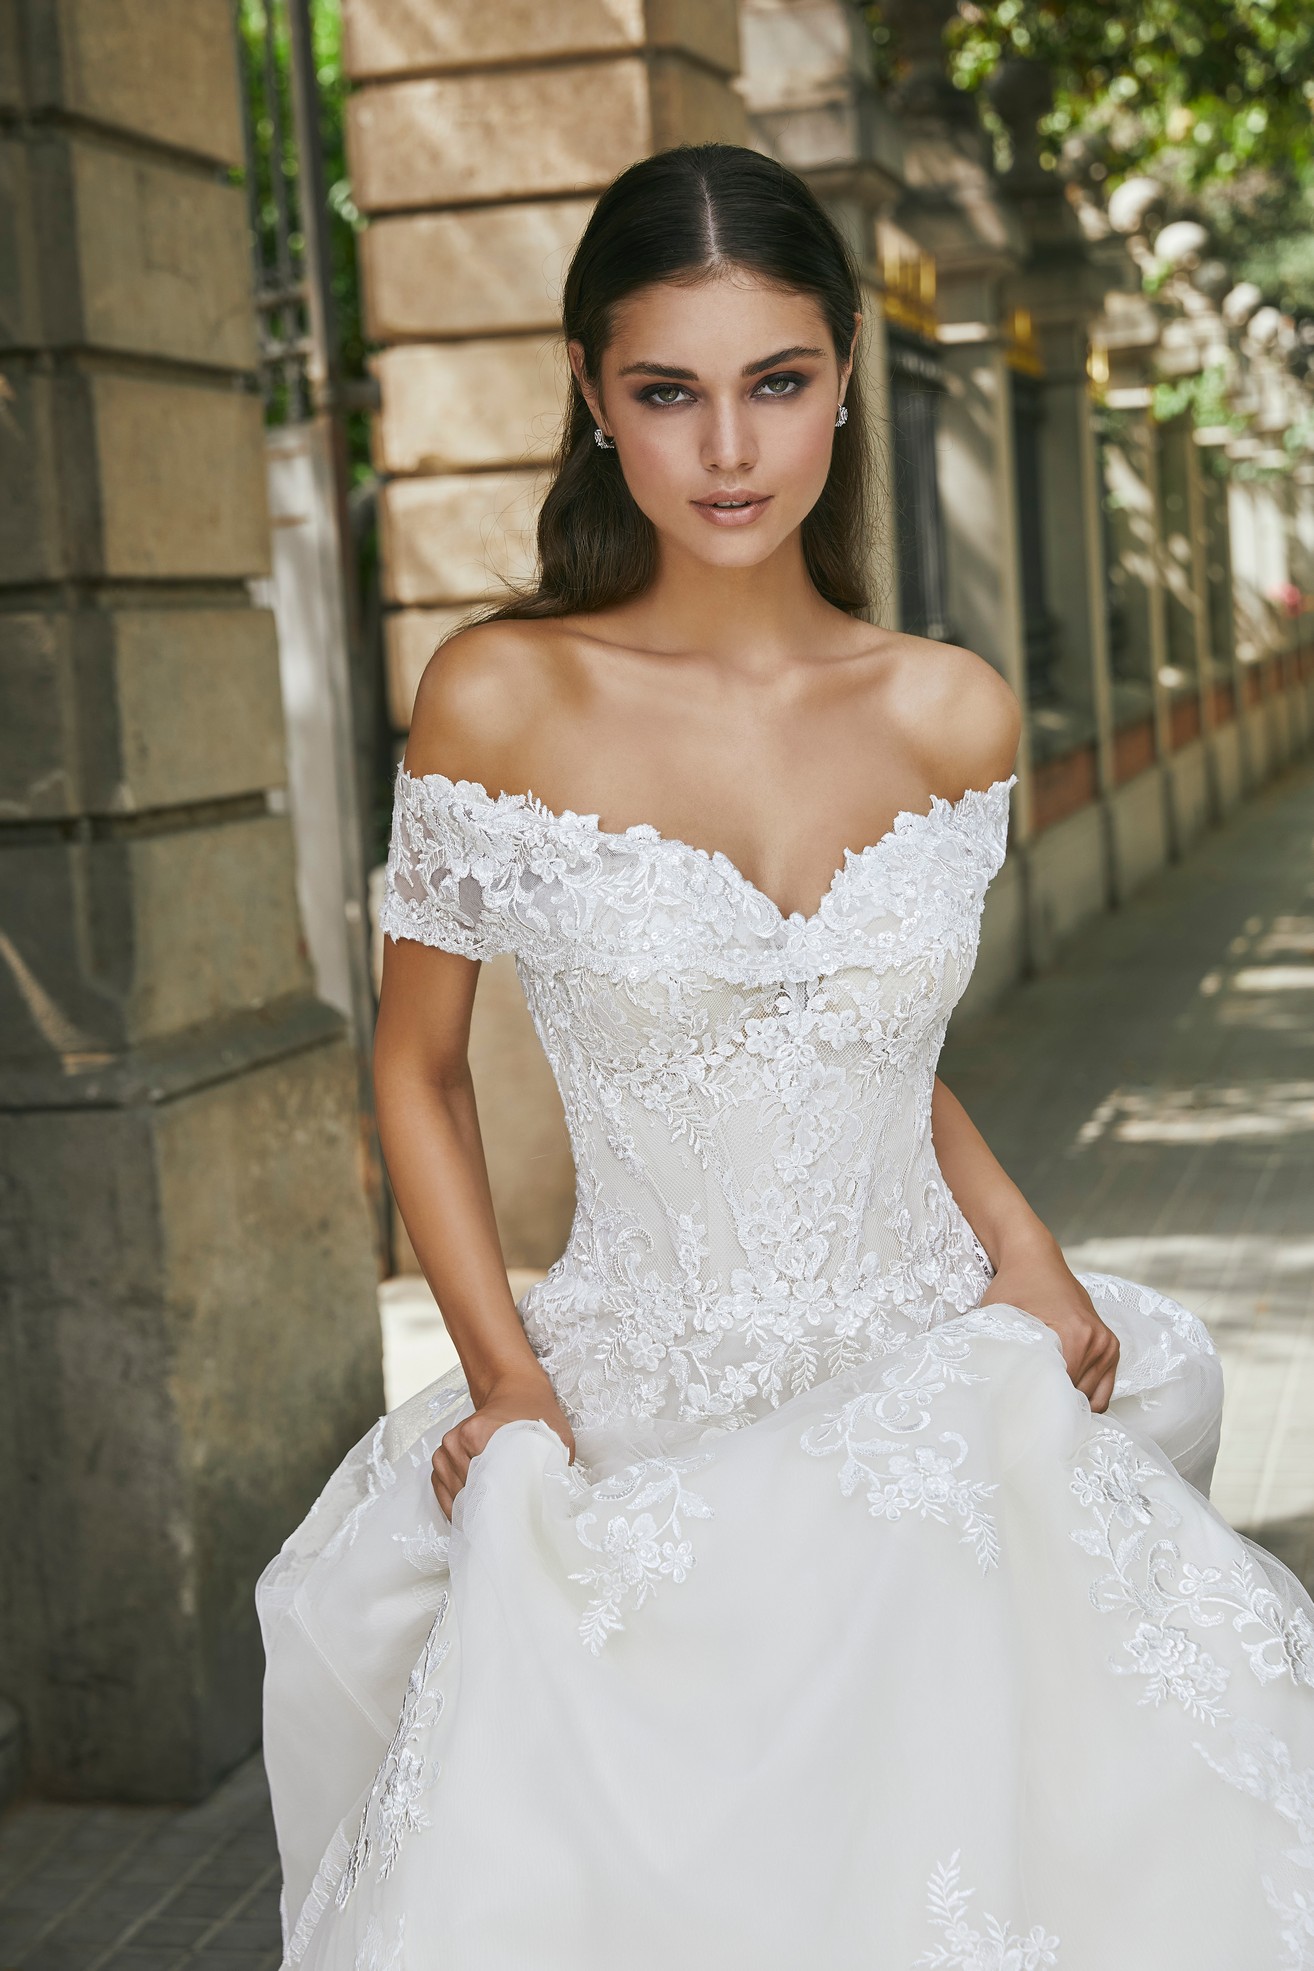 Model stood outside holding the skirt of Ronald Joyce style 69711, an off-the-shoulder lace appliqué A-line wedding dress in ivory.